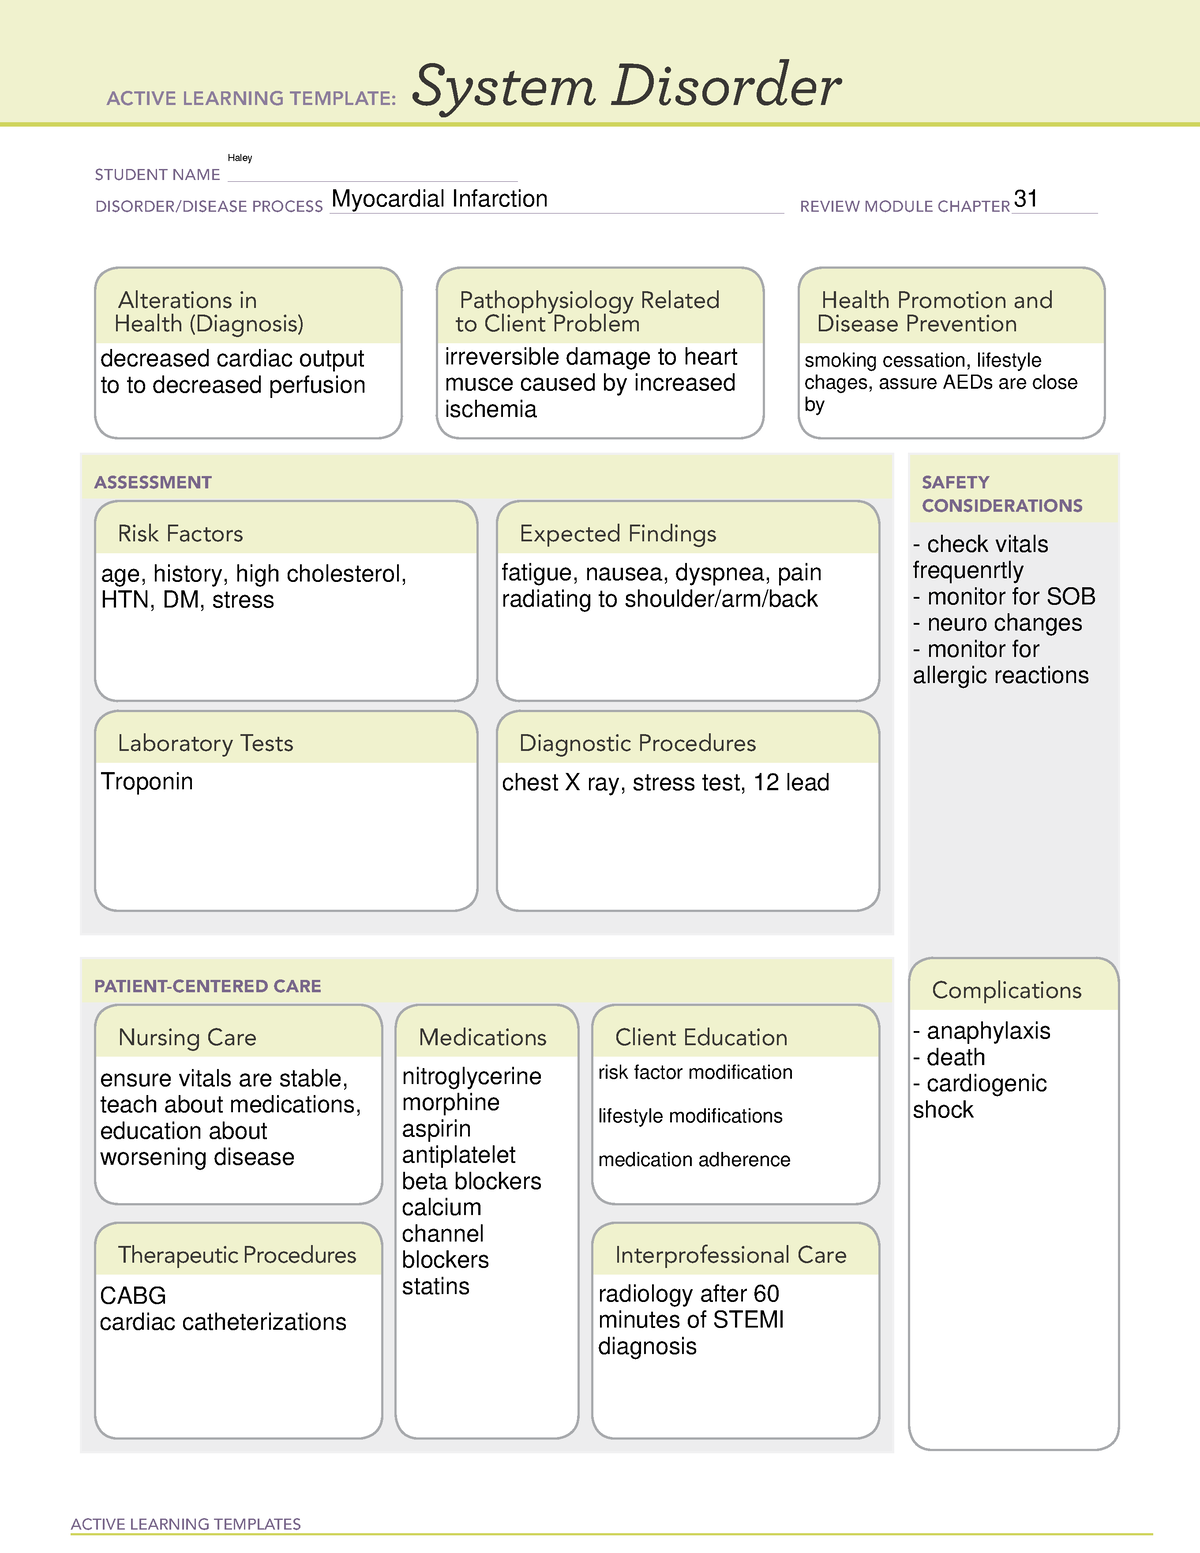 System disorder Myocardial infarction ACTIVE LEARNING TEMPLATES